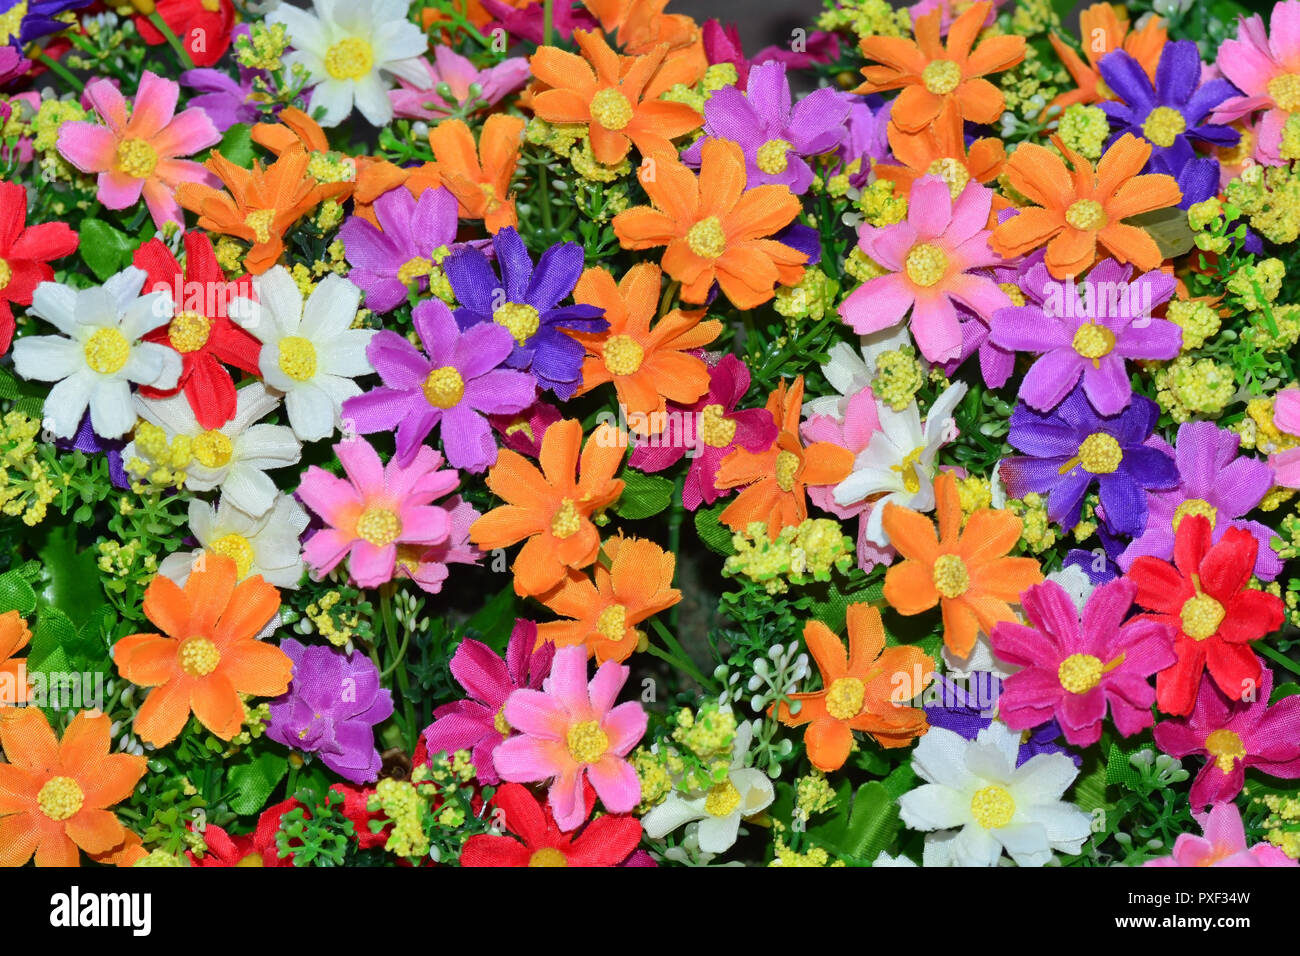 Stunning Collection of Over 999 Colorful Flower Images in Full 4K ...